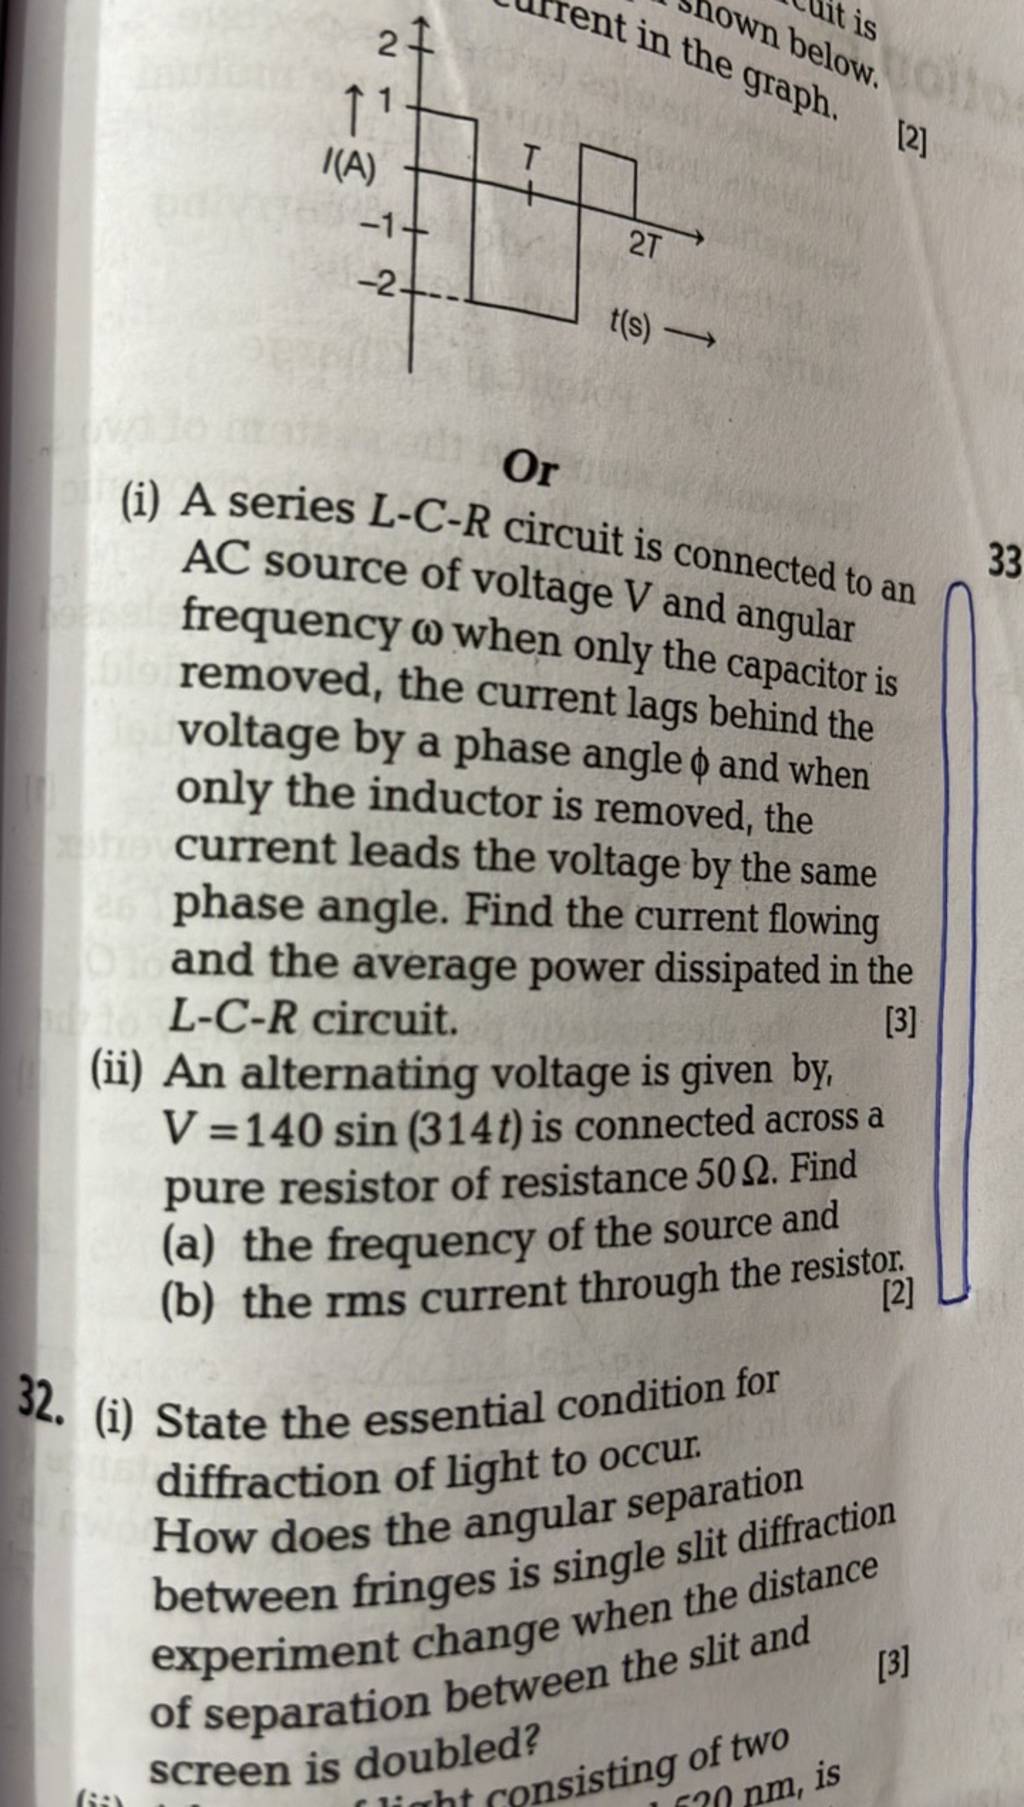 (i) A series L−C−R circuit is connected to AC source of voltage V and 